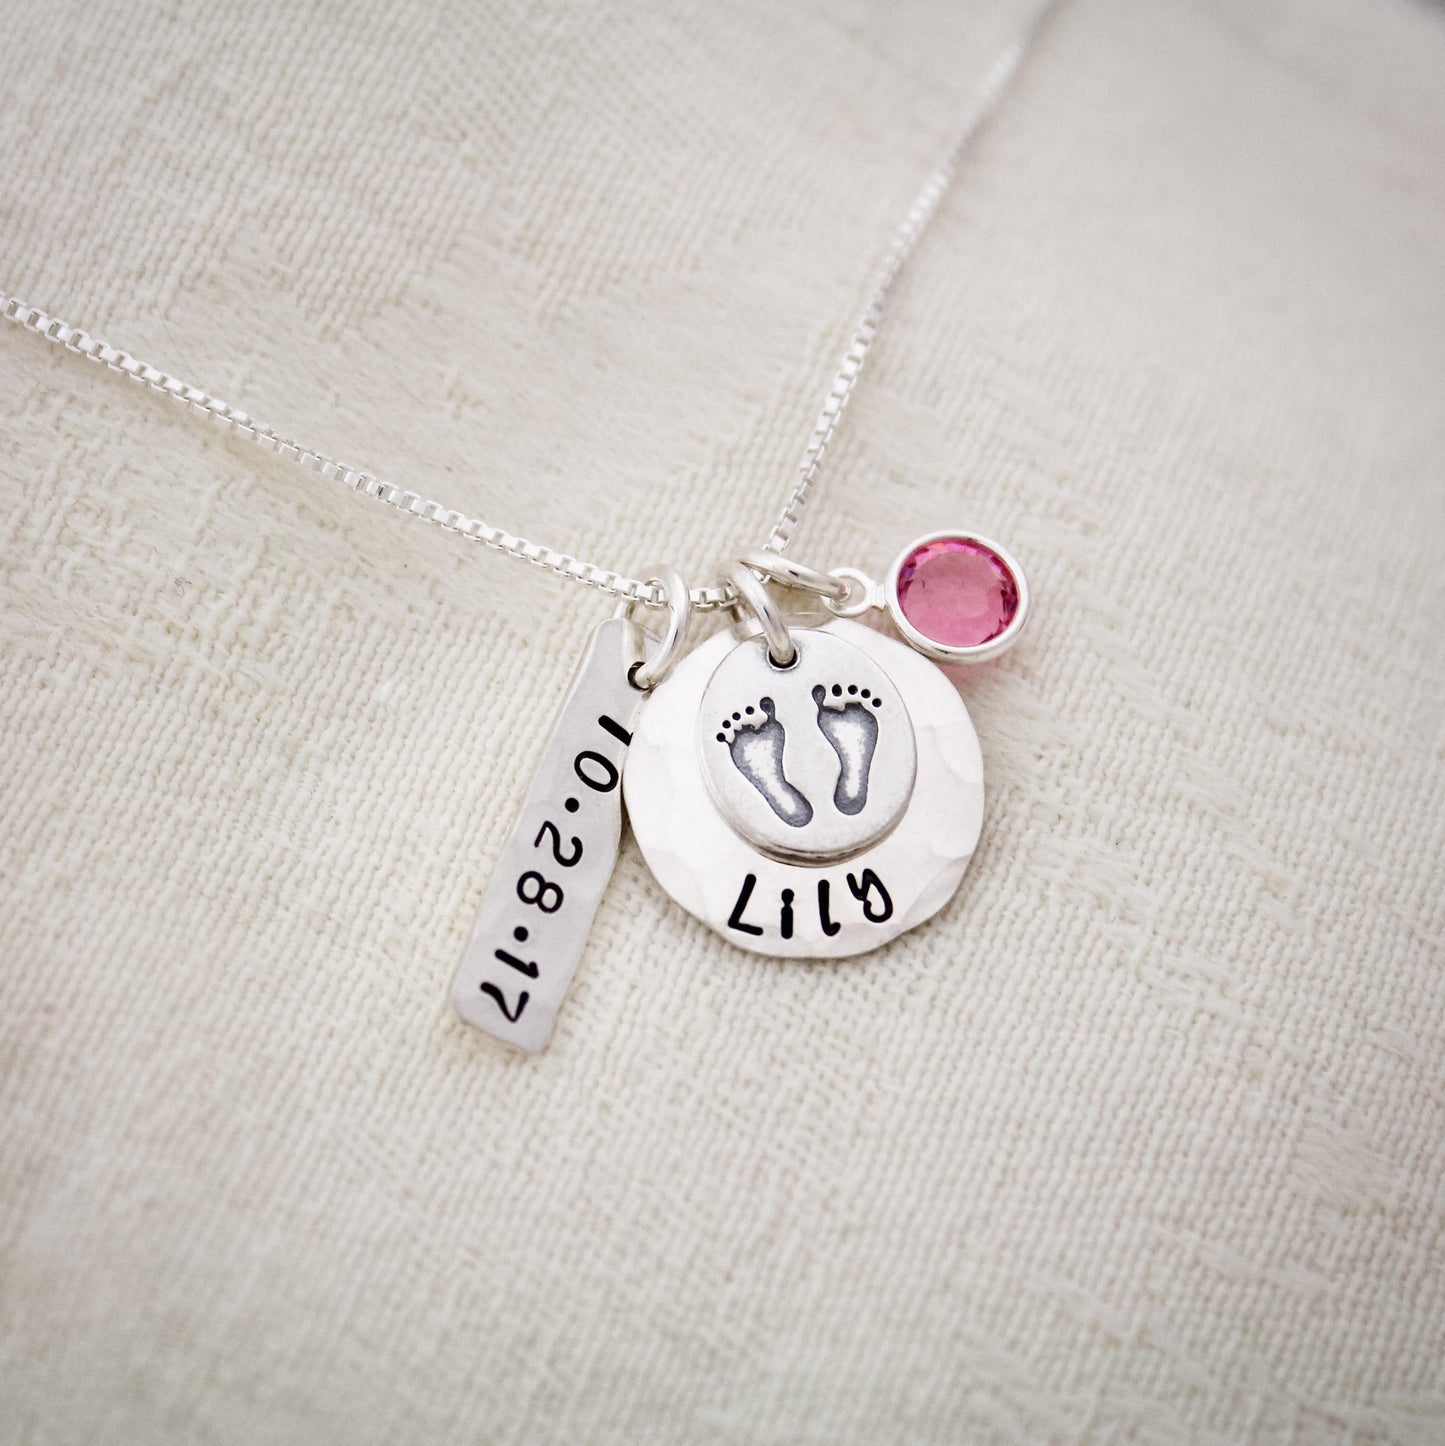 Personalized Baby Feet New Mommy Mom Necklace, Push Present, Mother's Day Gift, Gifts for Her, Hand Stamped Jewelry, Personalized Jewelry